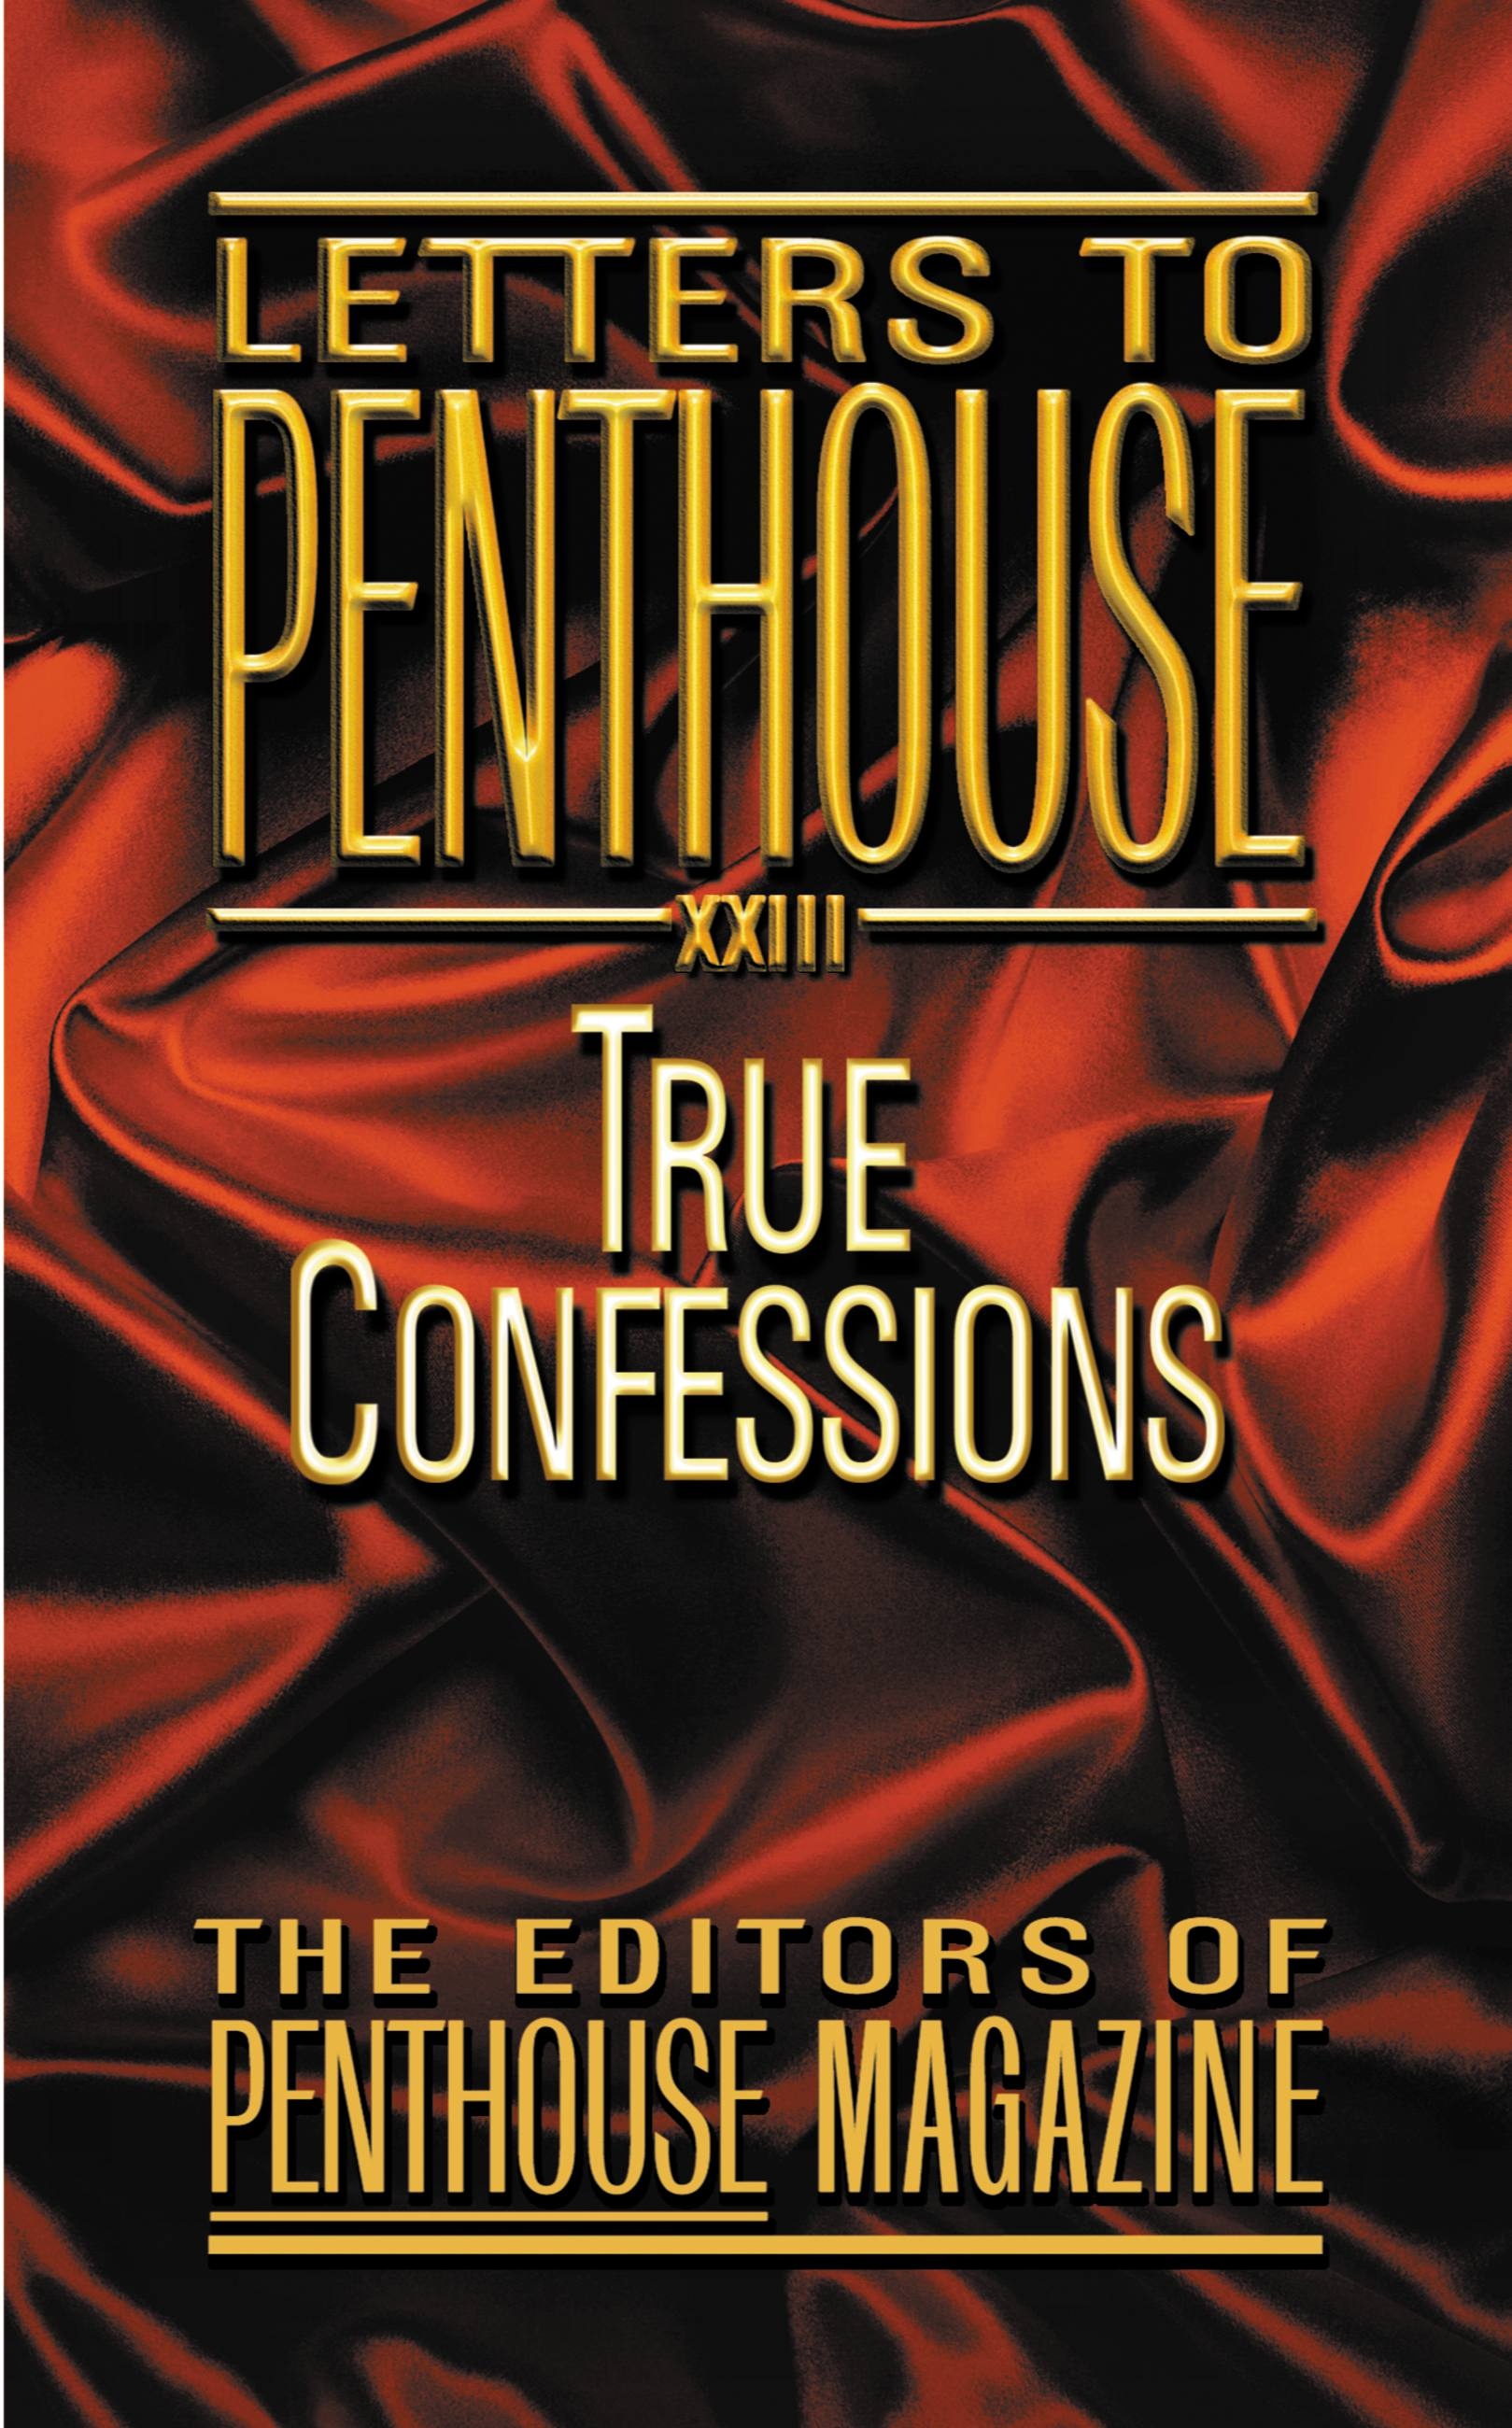 Letters to Penthouse XXIII by Penthouse International Hachette Book Group pic